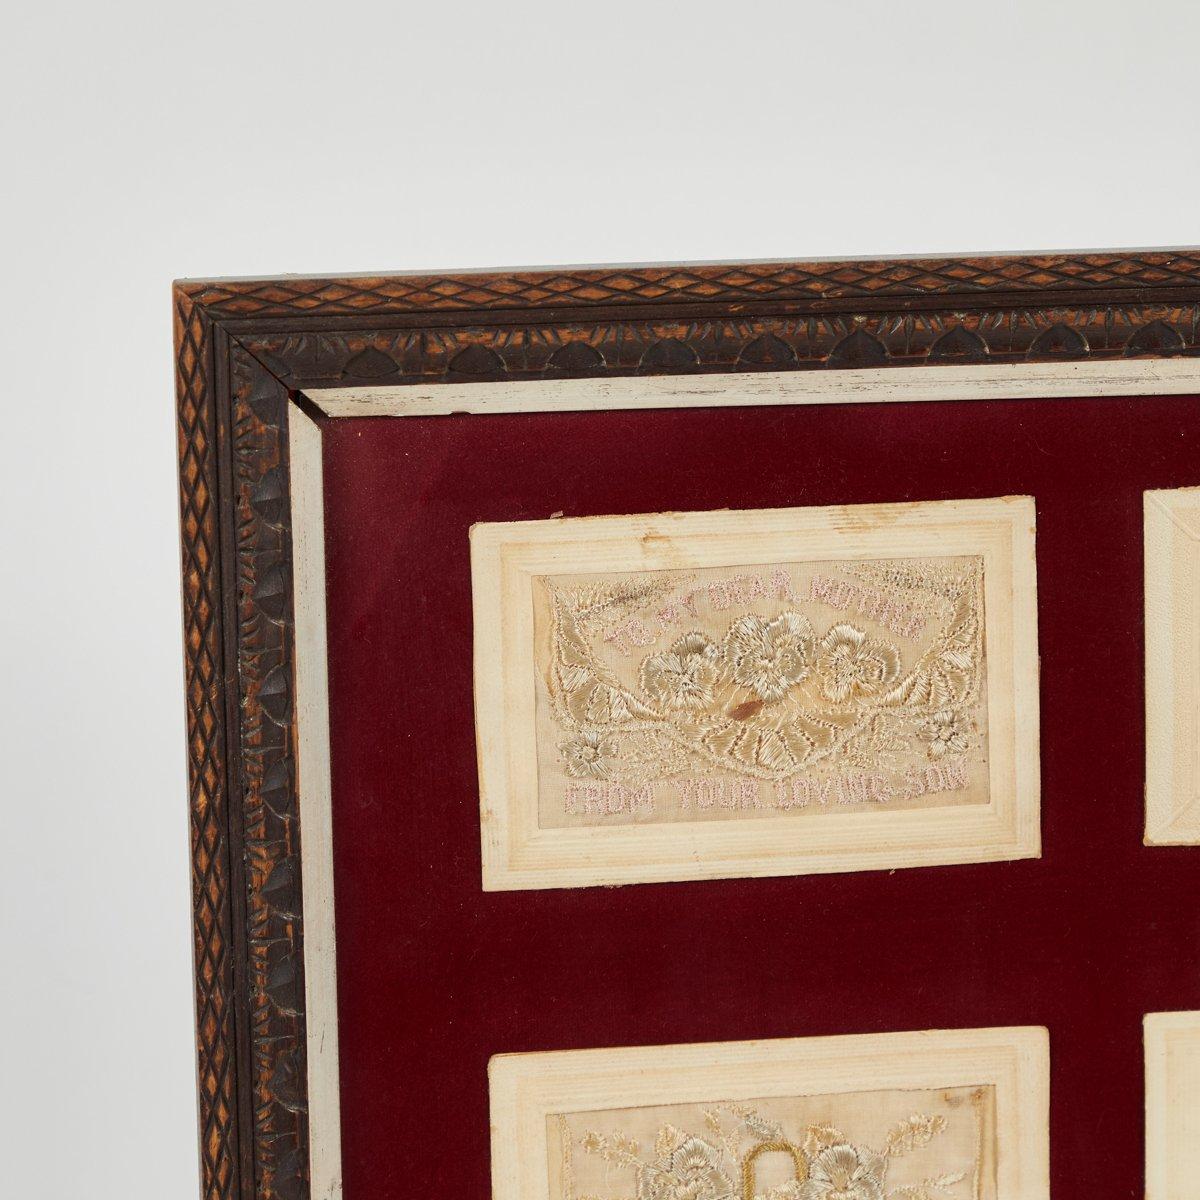 Collection of four framed embroidered valentines from Victorian England. A romantic and tender piece, this collection of fine needlework harkens back to another era. Displayed on a deep red velvet mounting block in a dark, finely carved wood frame,